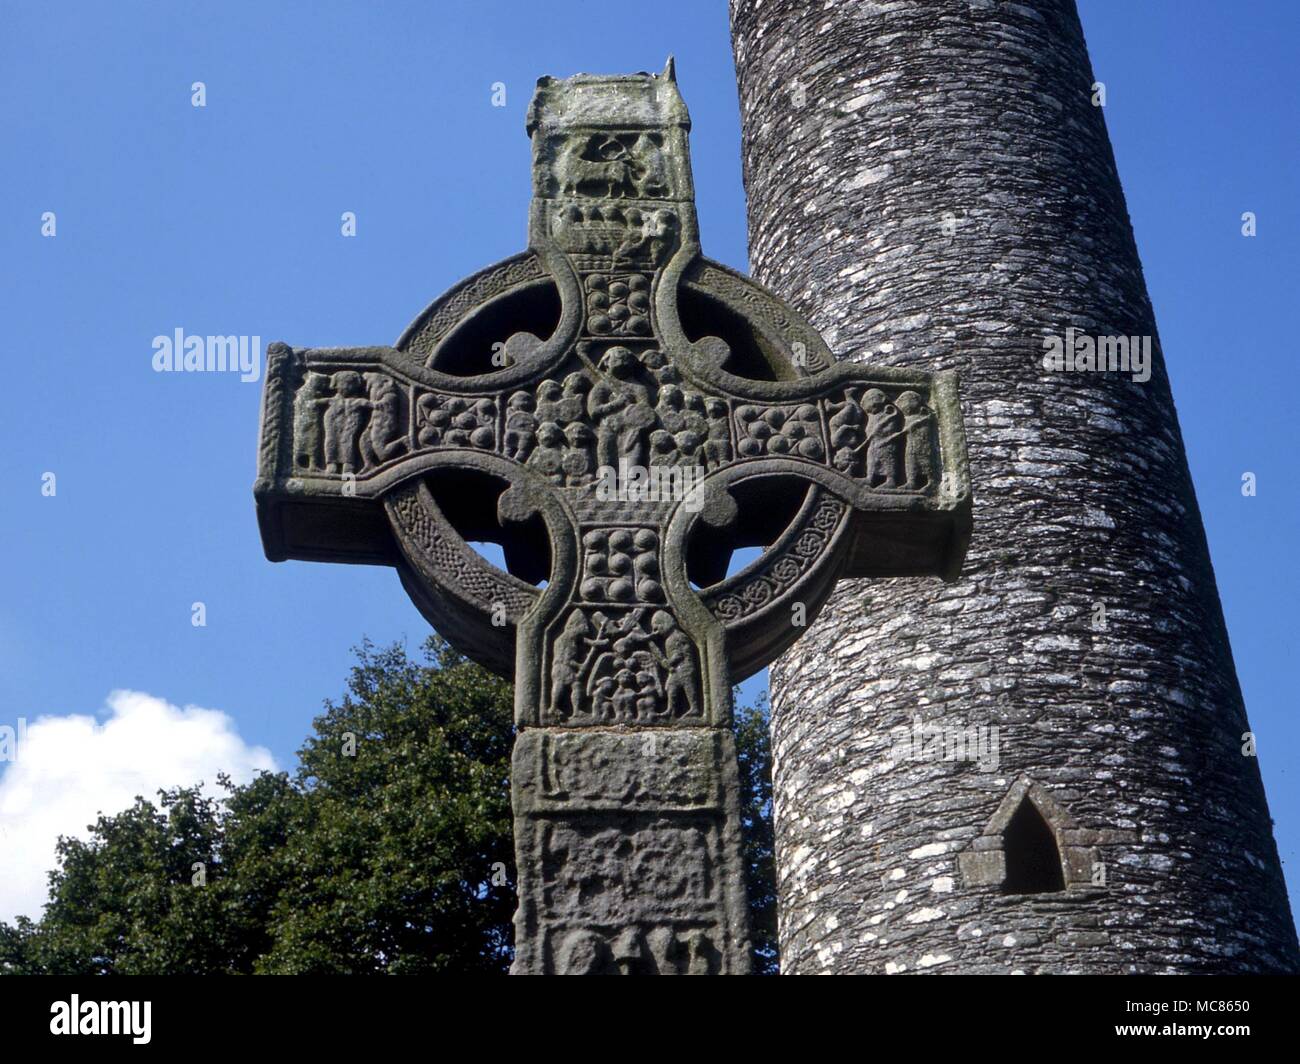 CHRISTIAN - Last Judgement. Detail of central boss of the 10th century 'South Cross' at Monasterboice, with The Last Judgement theme. Christ holds the cross and the flowering rod. Below is Michael with the scales. The cross is 18 feet high, sometimes called Muiredach's cross Stock Photo